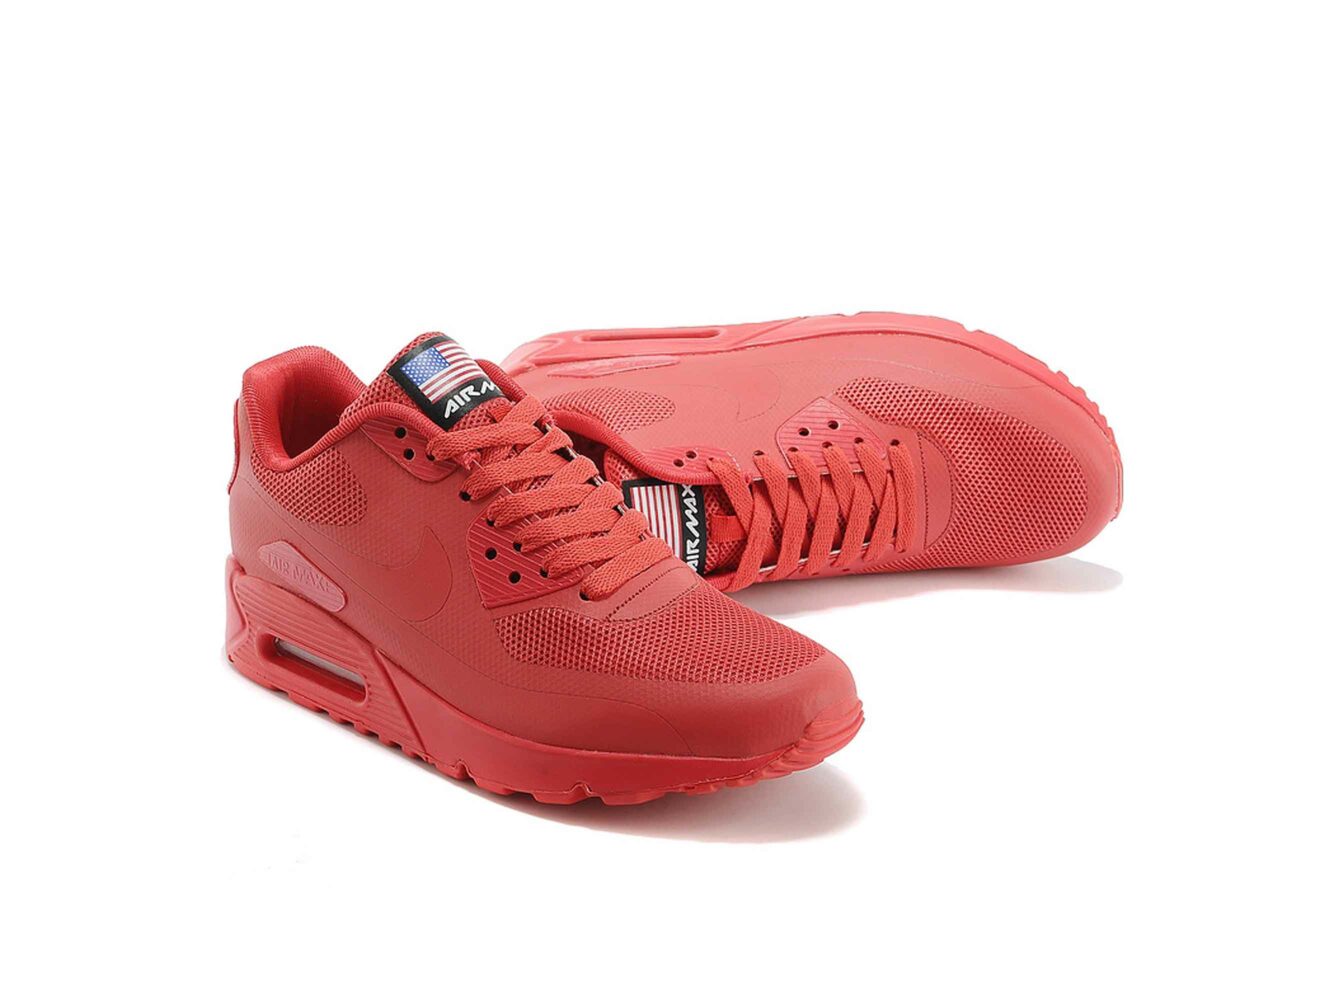 Nike Air Max 90 Hyperfuse Independence Day 2013 Red Купить